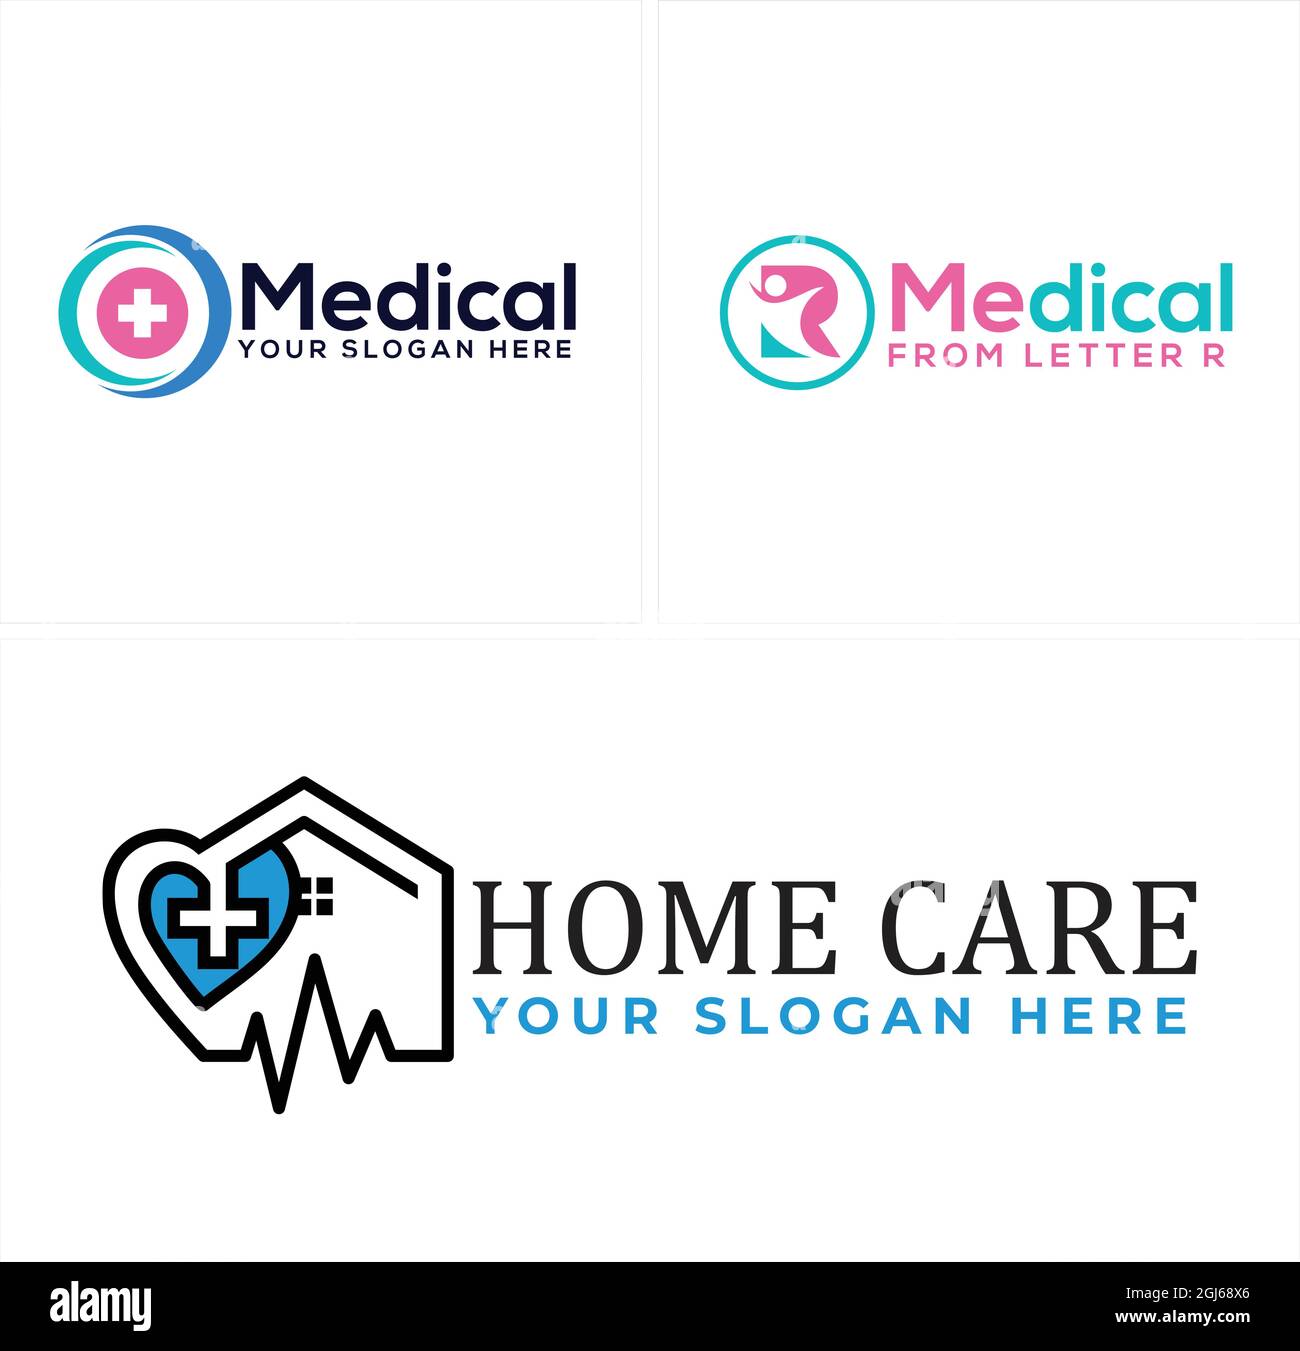 Medical home care people logo design Stock Vector